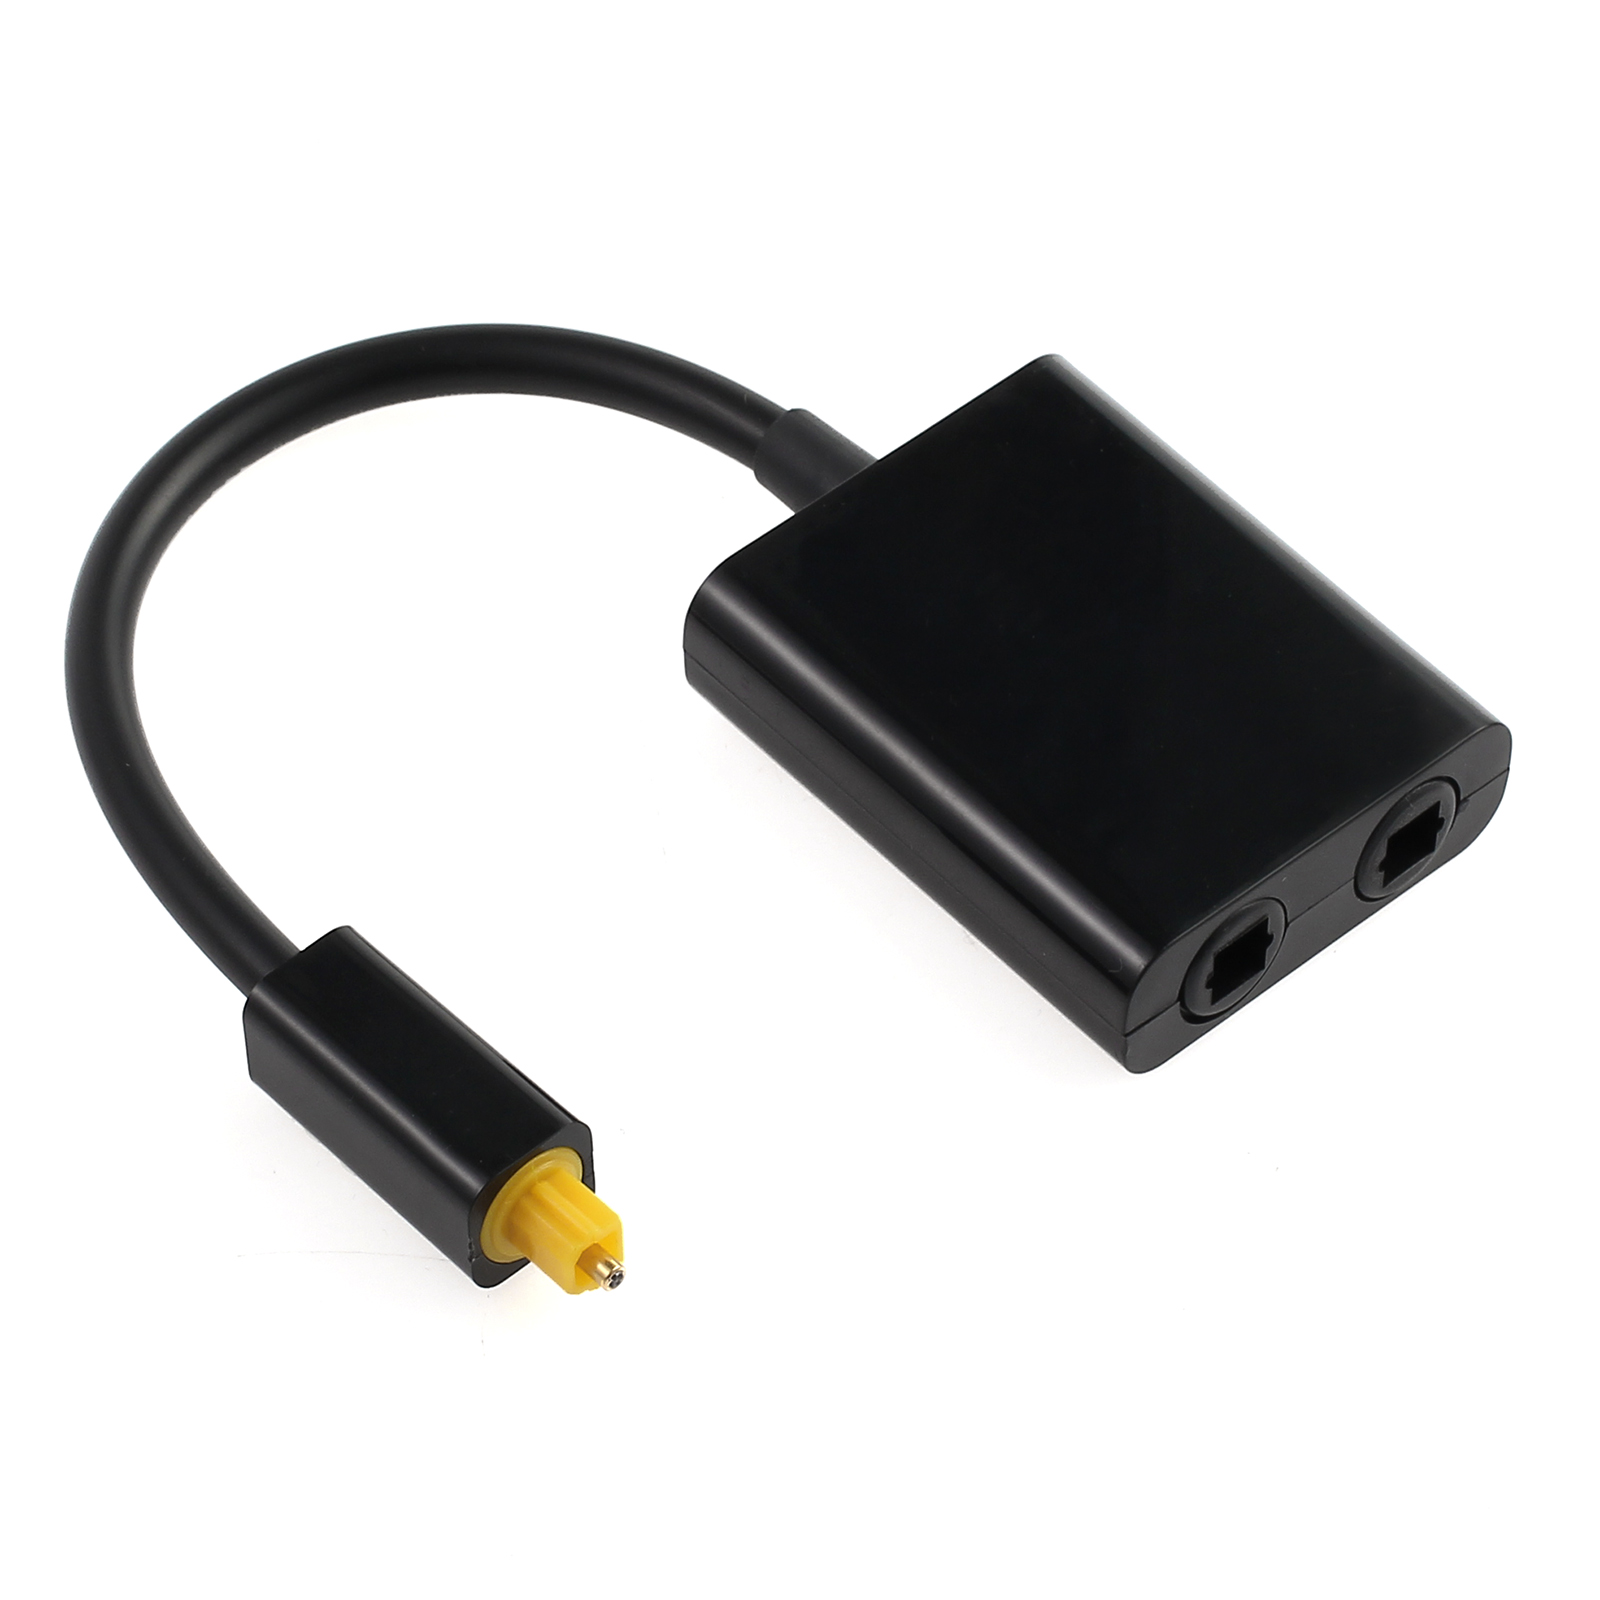 optical audio splitter 1 in 2 out